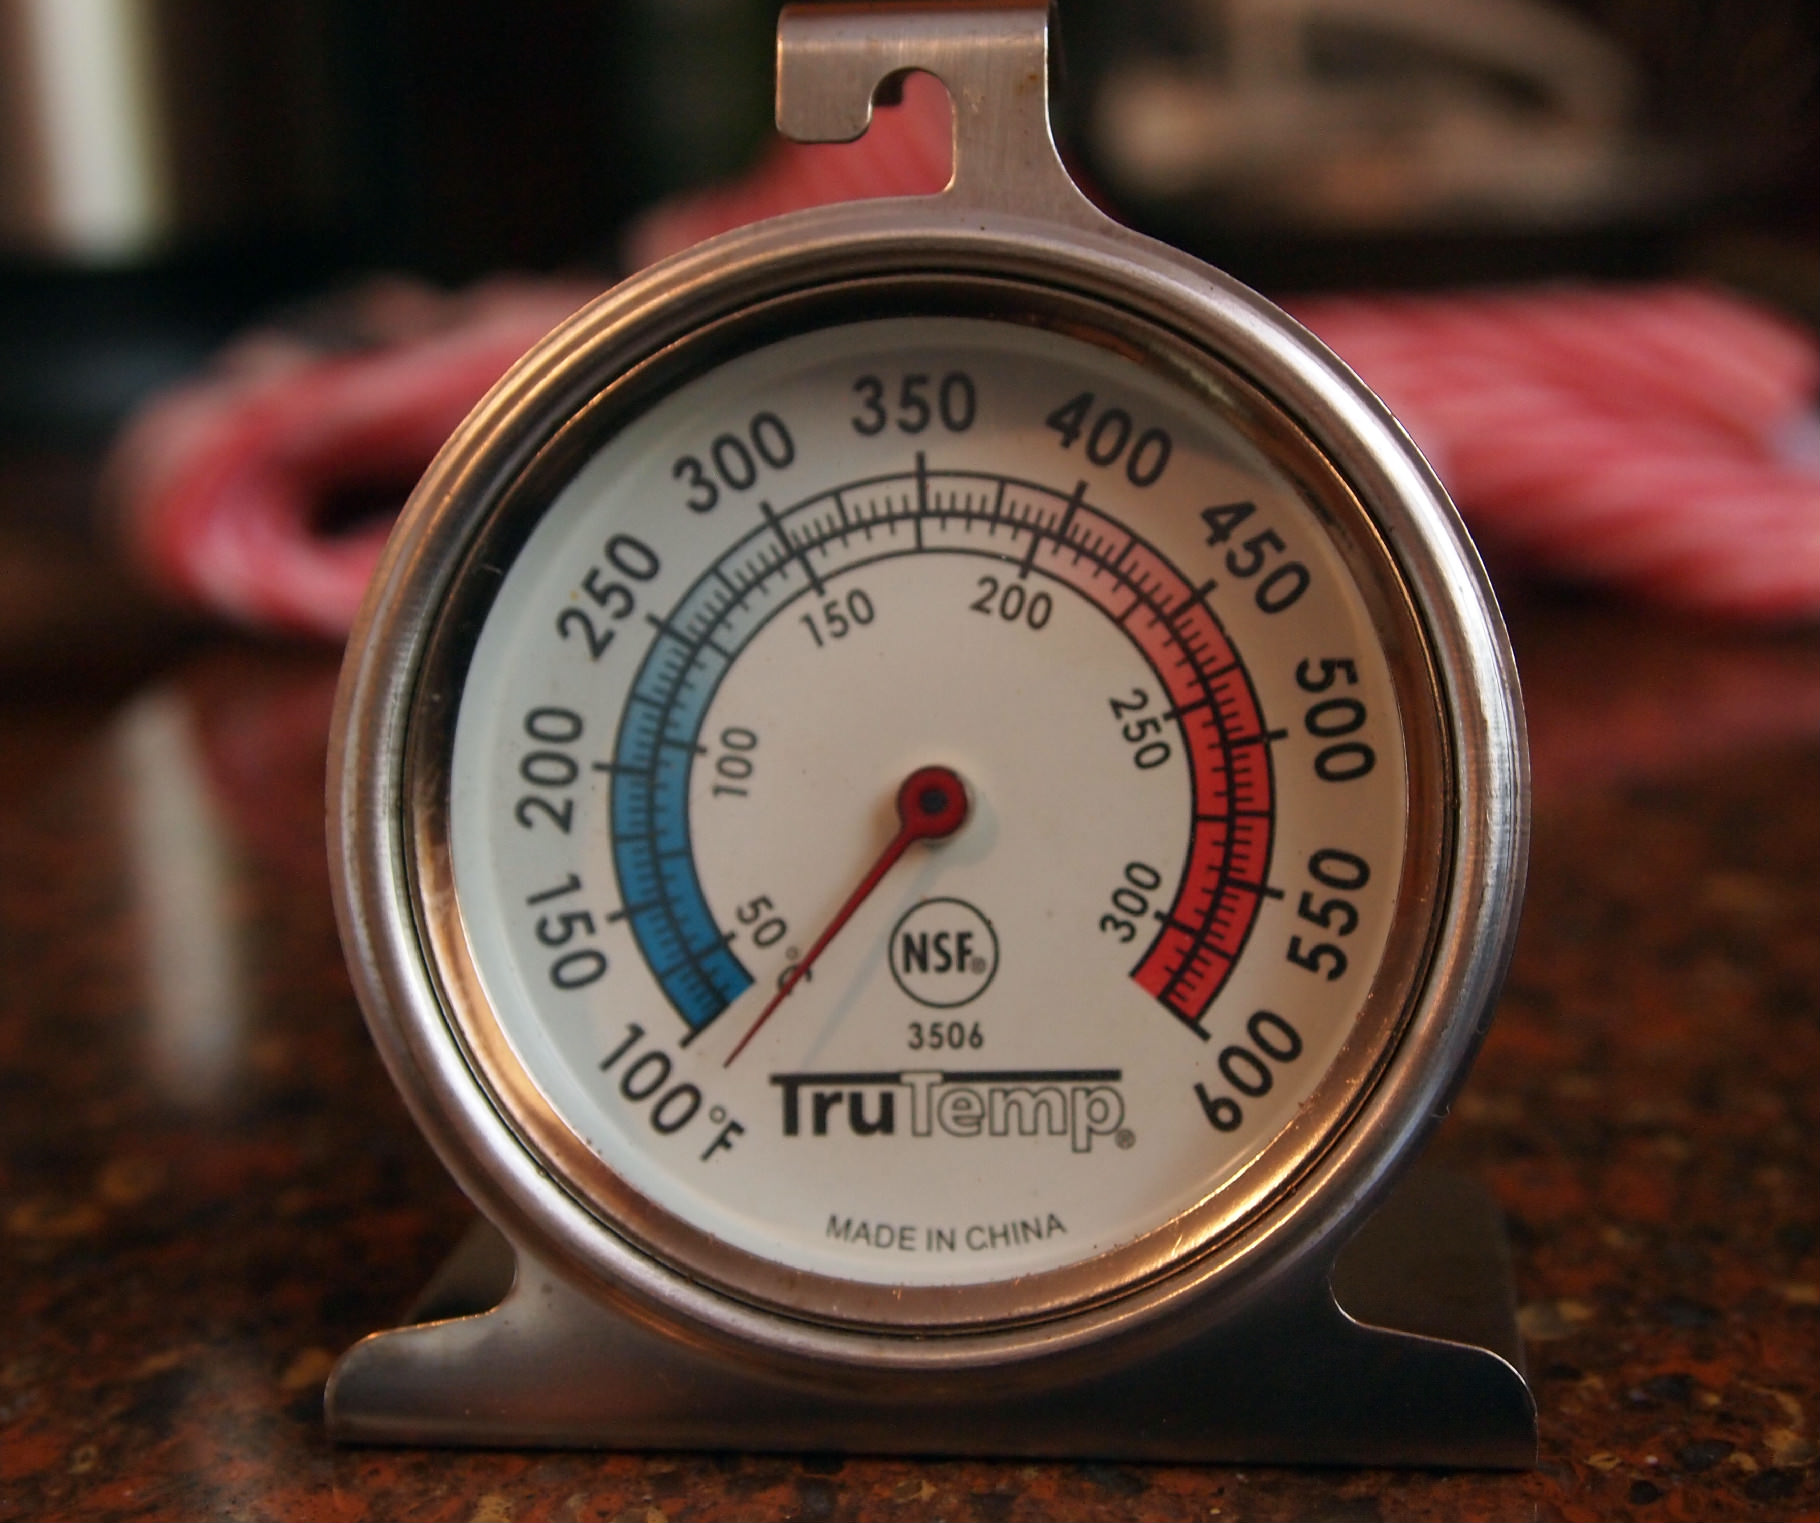 Heat and temperature in an oven are best gauged with an oven thermometer